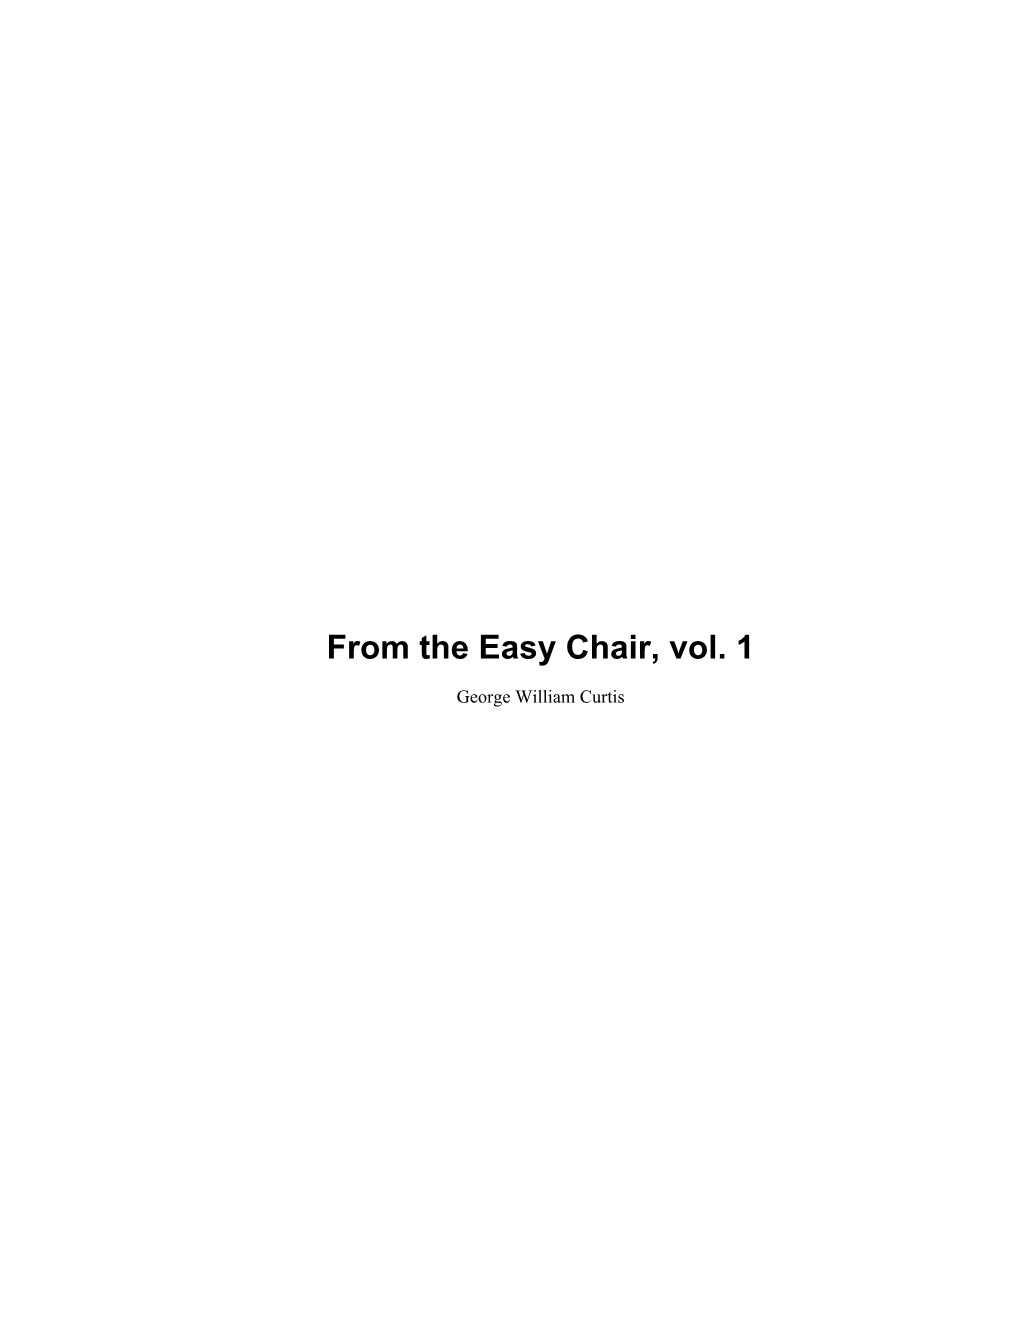 From the Easy Chair, Vol. 1